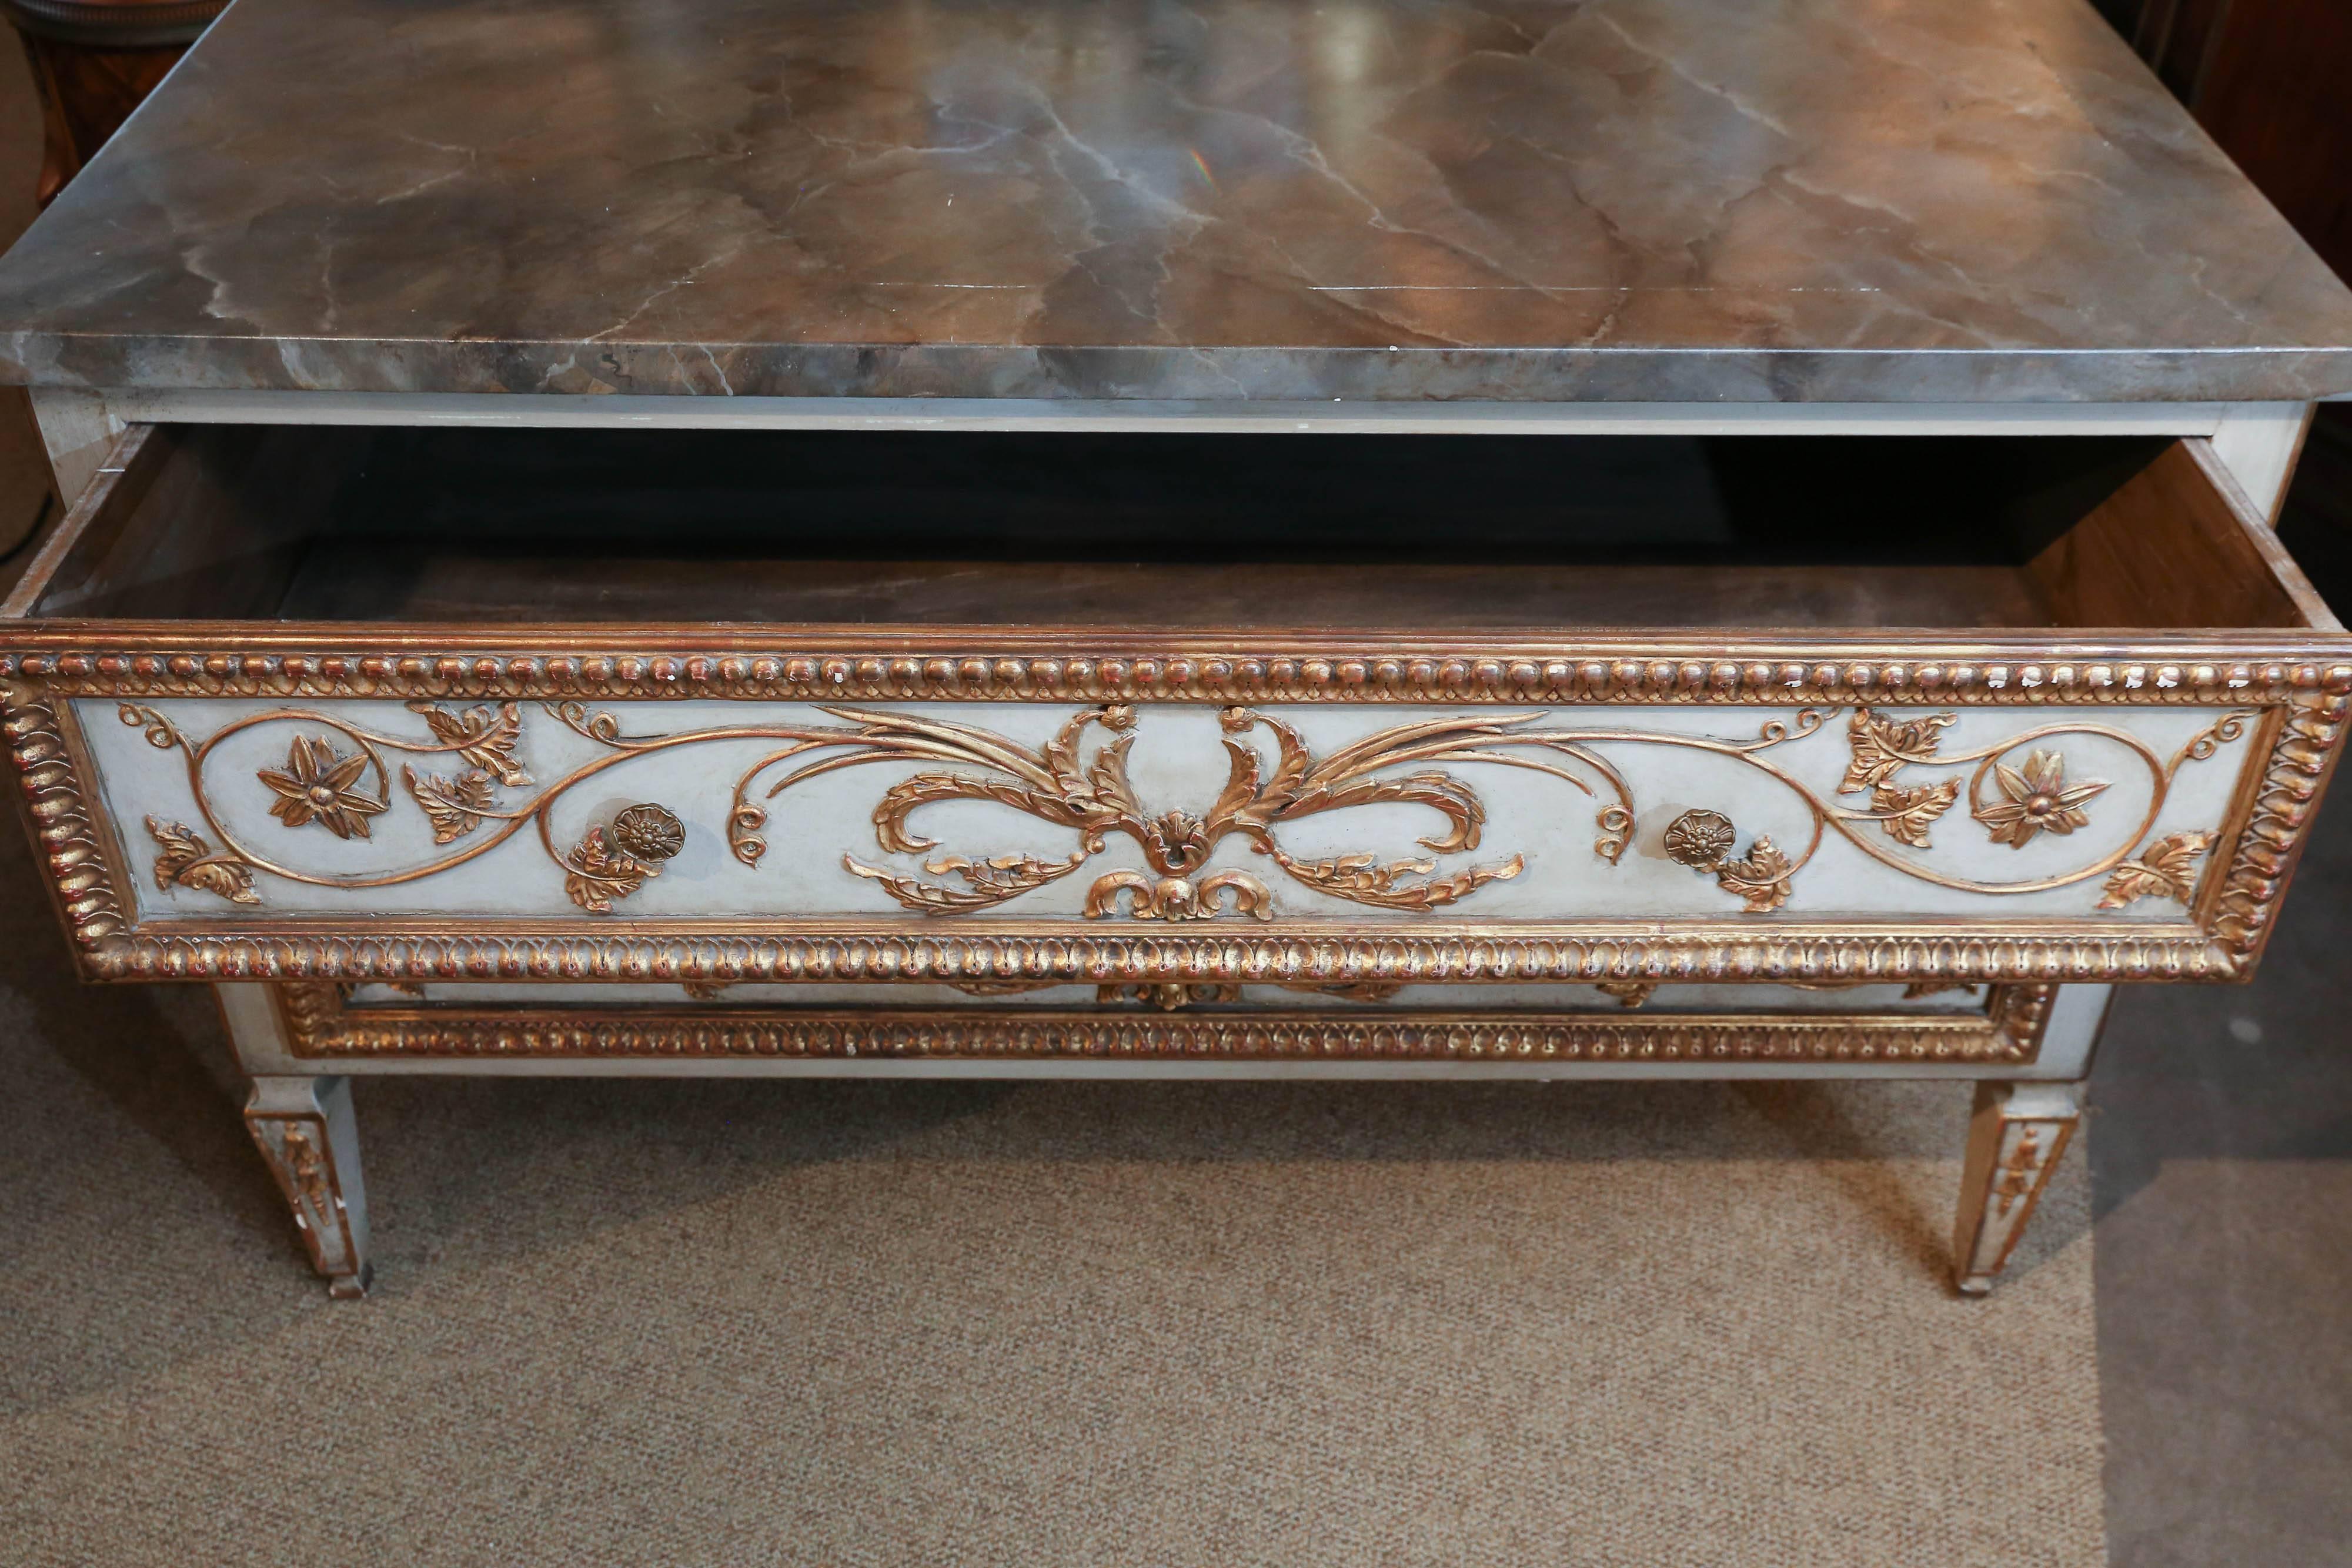 Hardwood Louis XVI-Style Polychrome and Faux Marbre Commode, 19th Century